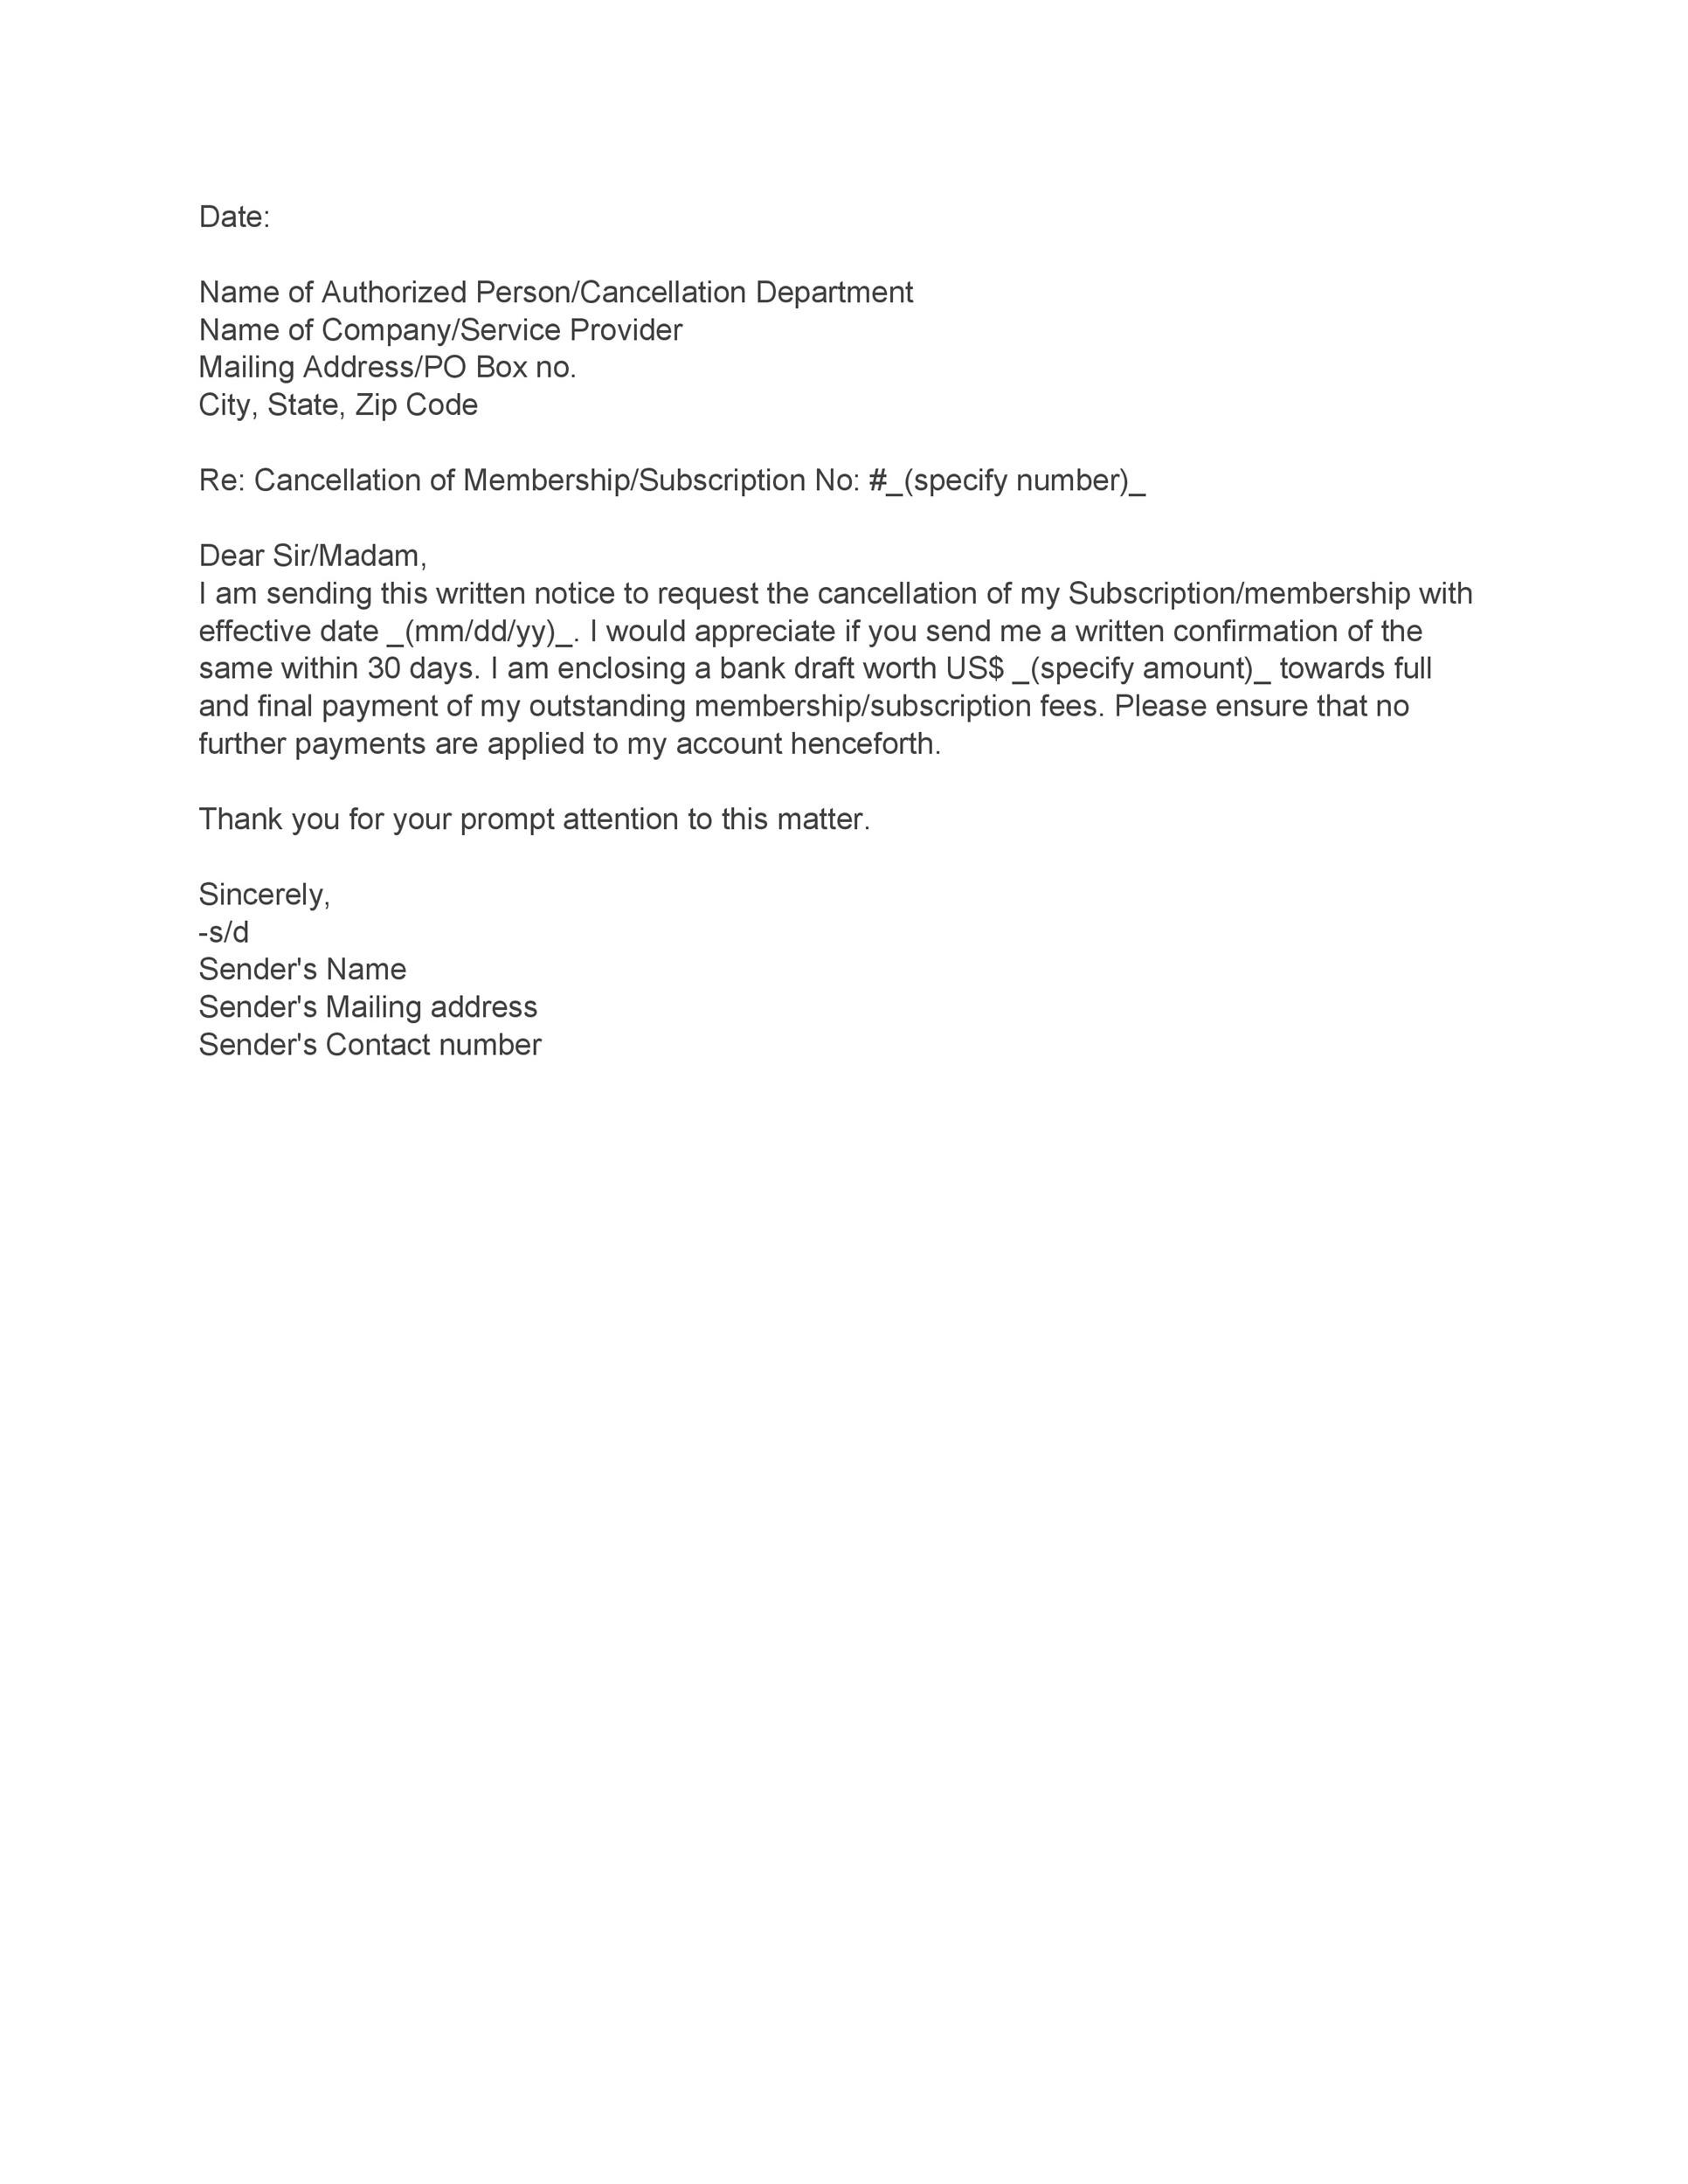 Fitness 19 Cancellation Letter from templatelab.com